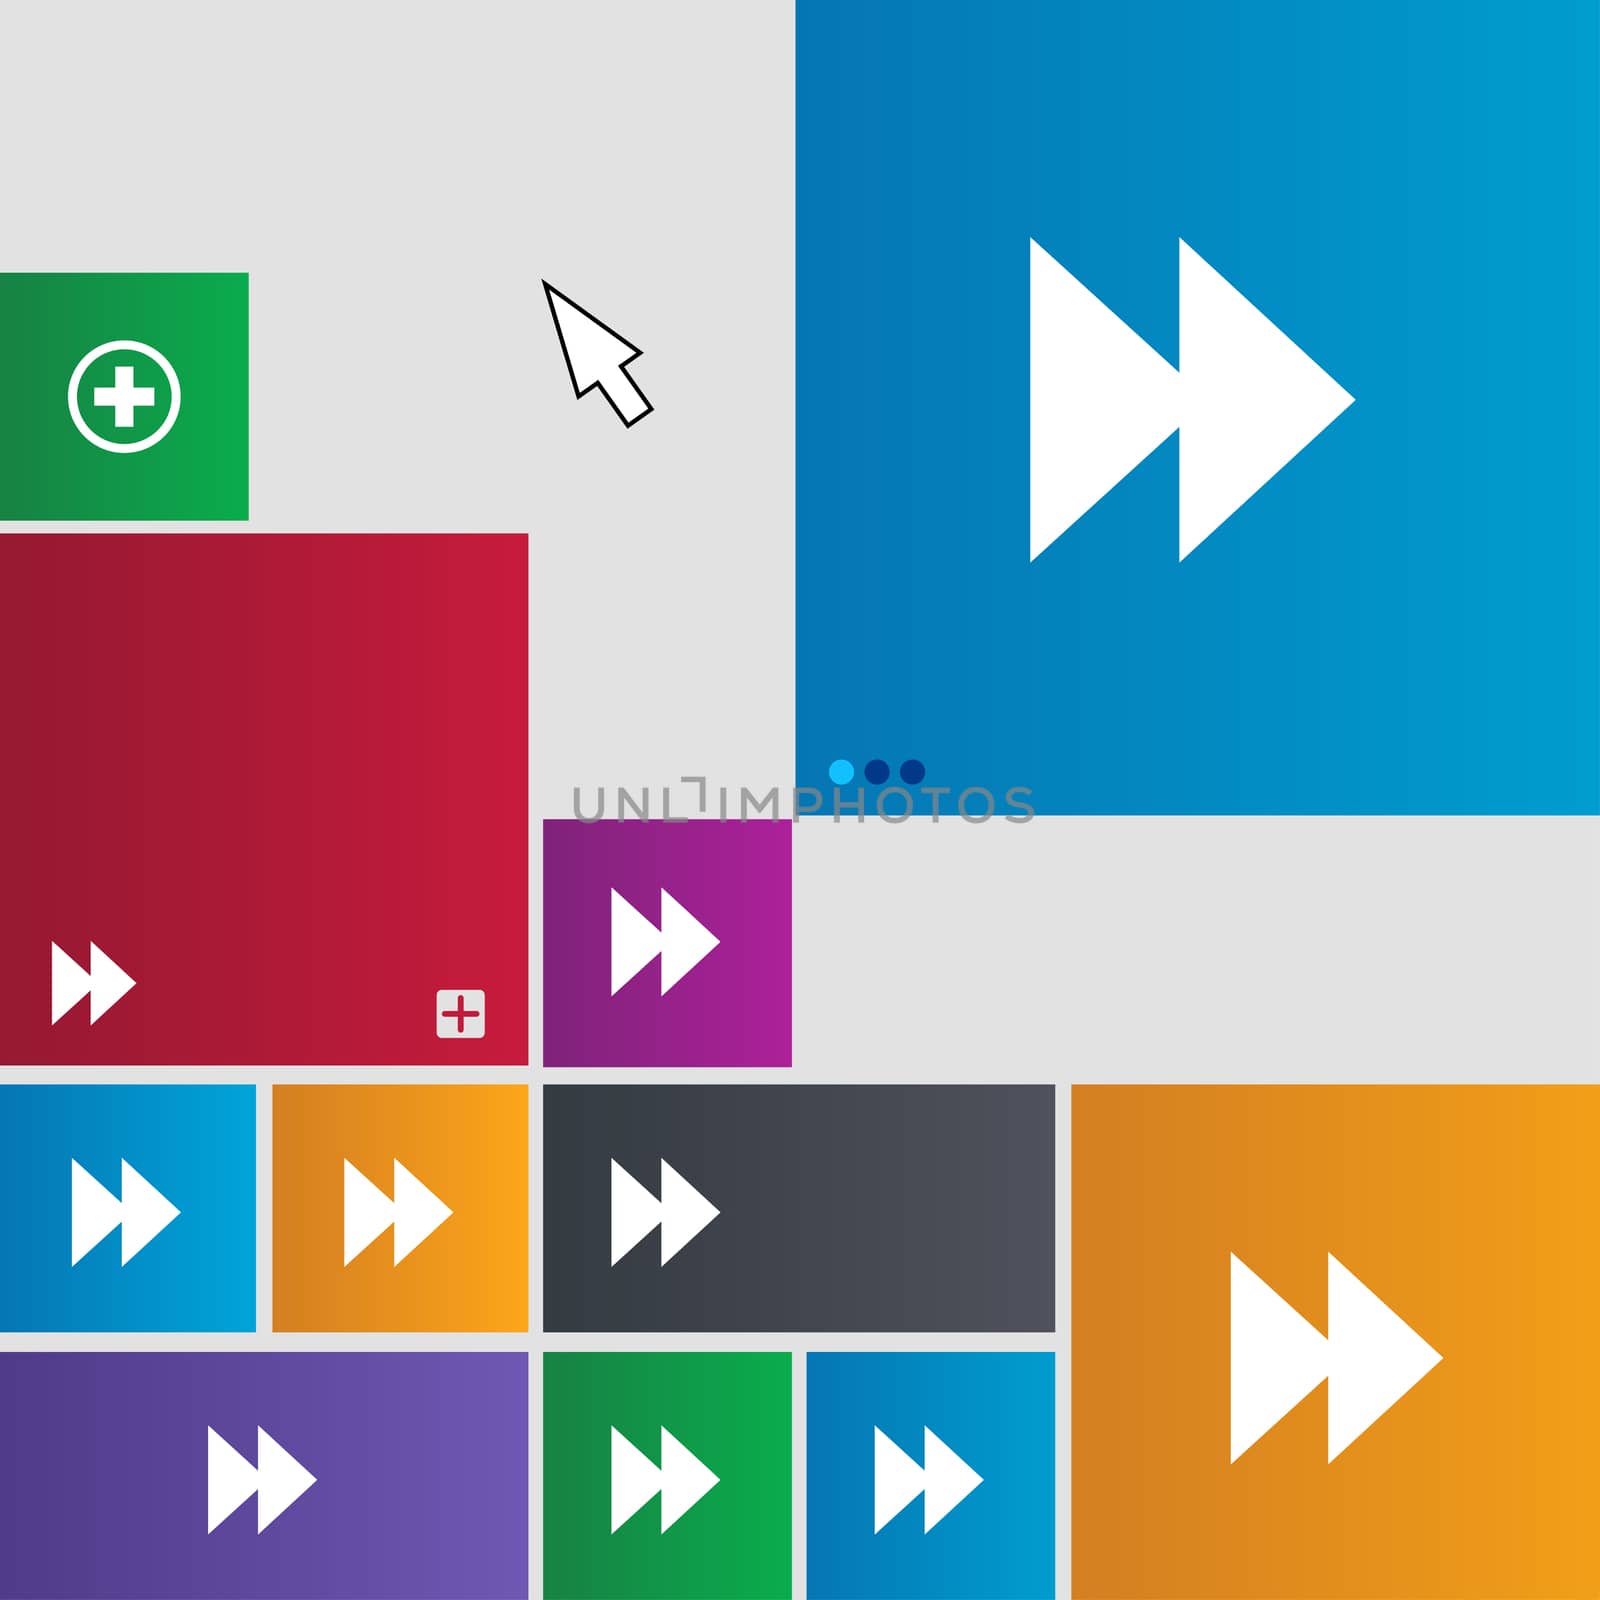 rewind icon sign. Metro style buttons. Modern interface website buttons with cursor pointer. illustration